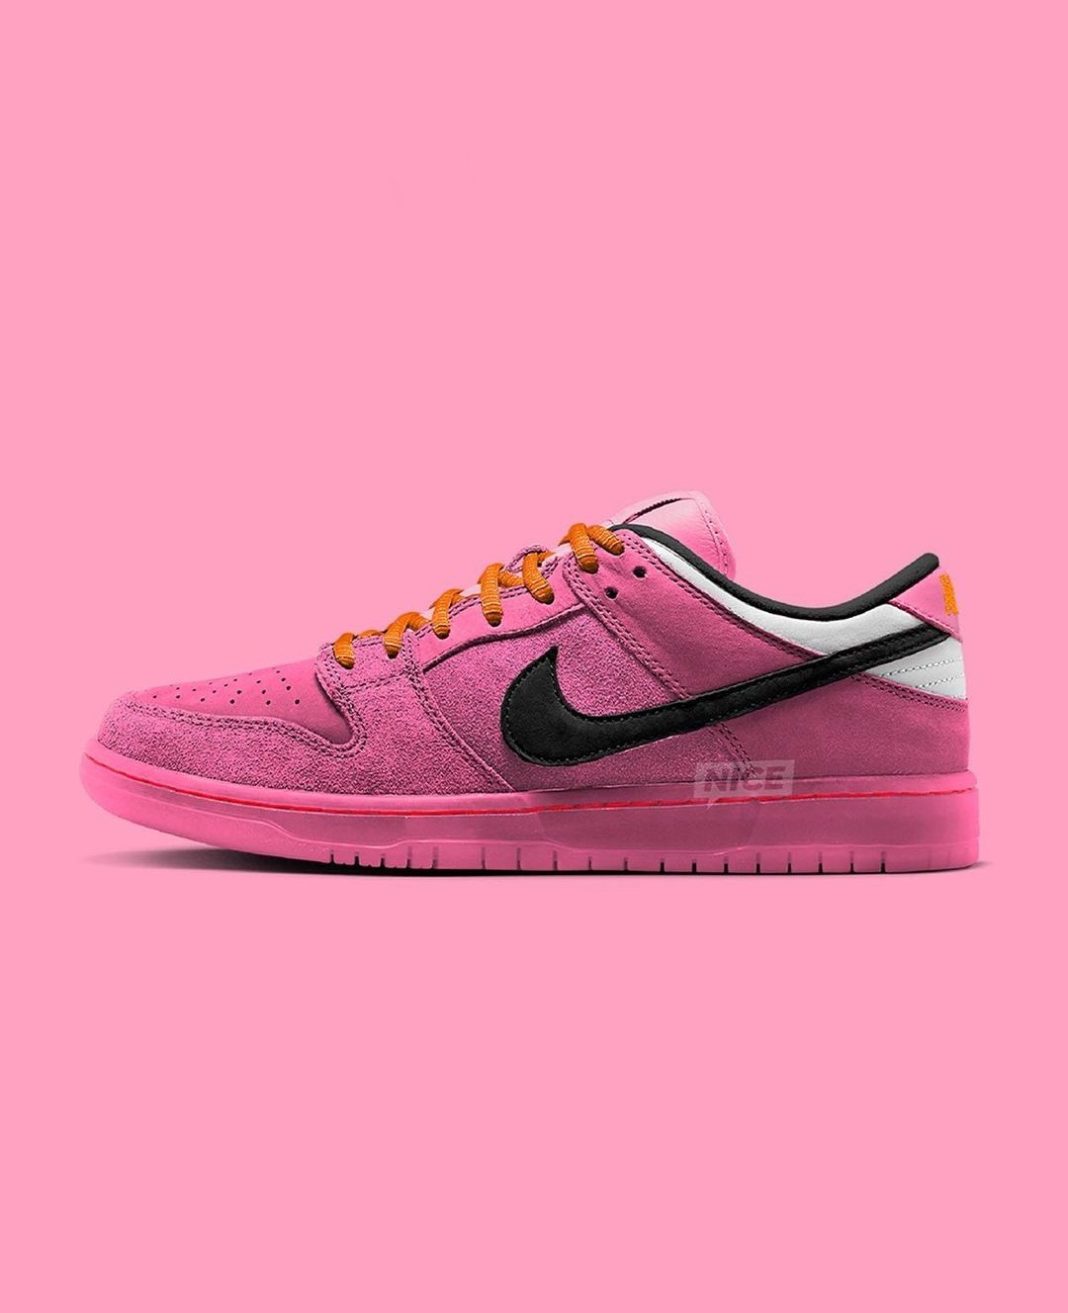 Powerpuff Girls x Nike SB Dunk Low Sneakers are Set to Be Released in